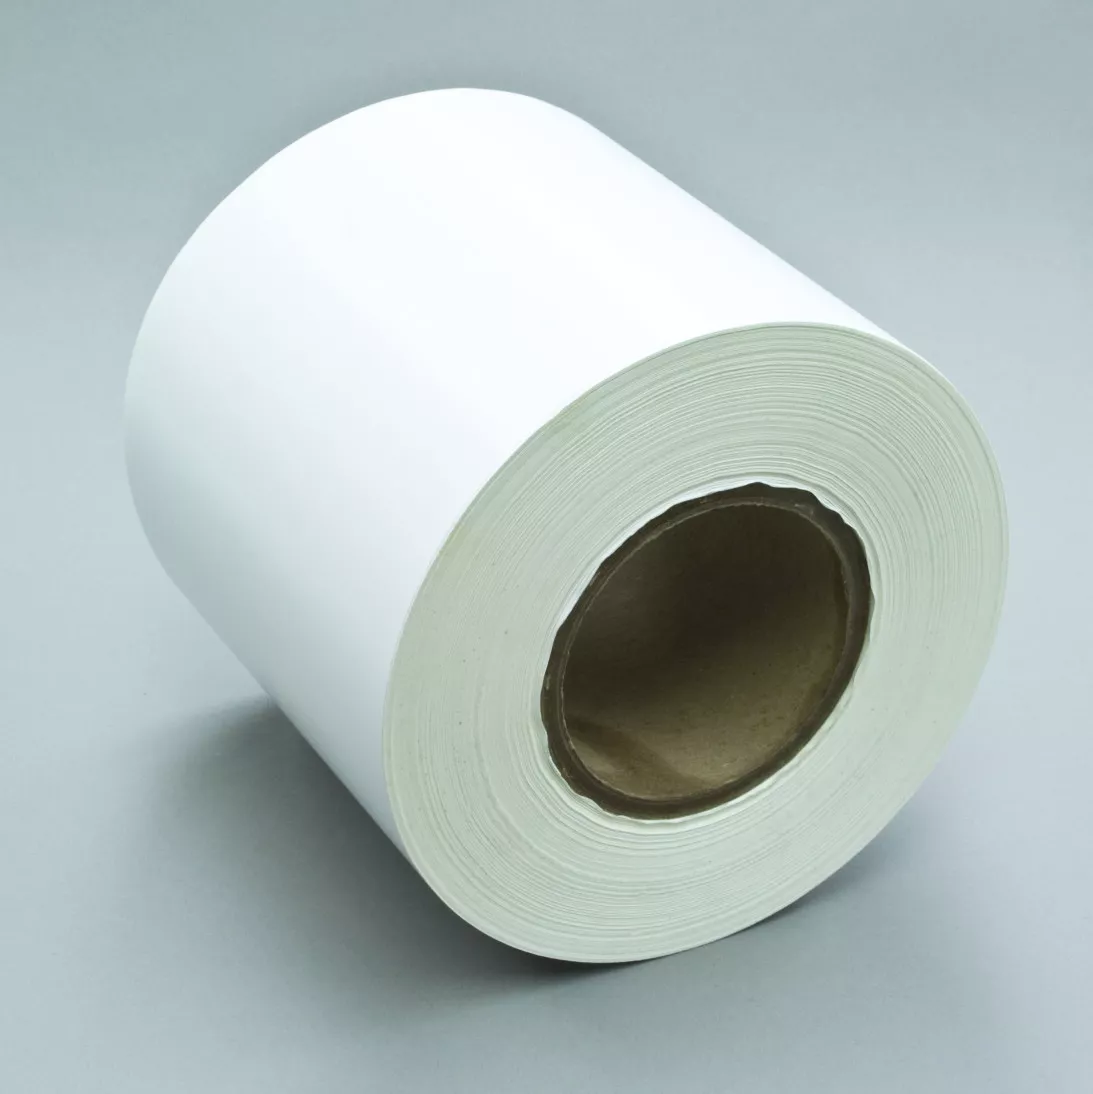 3M™ Sheet and Screen Label Material 7904, Soft White Vinyl, 20 in x 27
in, 100 sheets per case